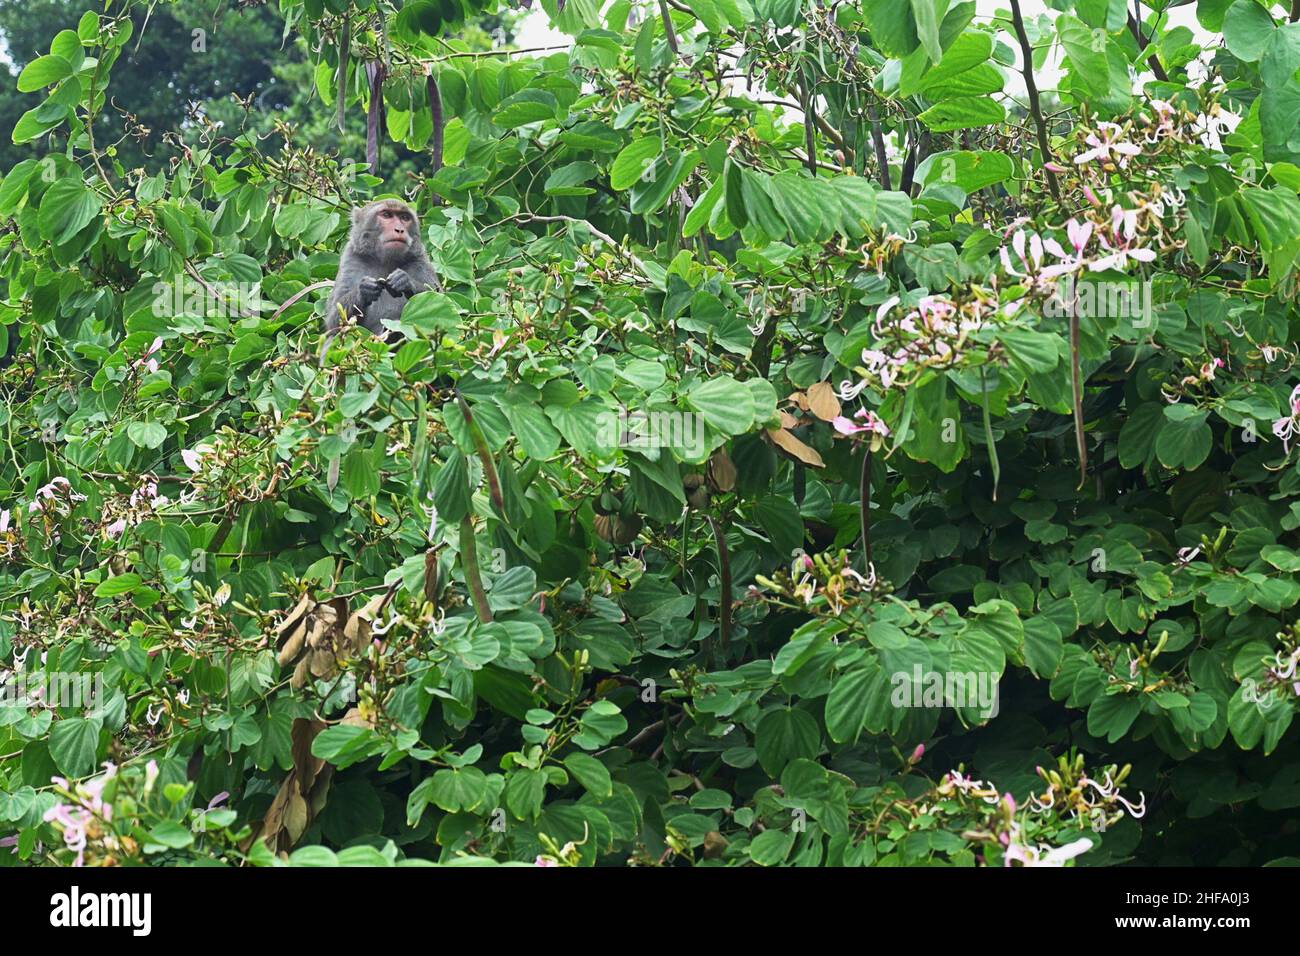 Formosan rock macaque on the tree. Stock Photo